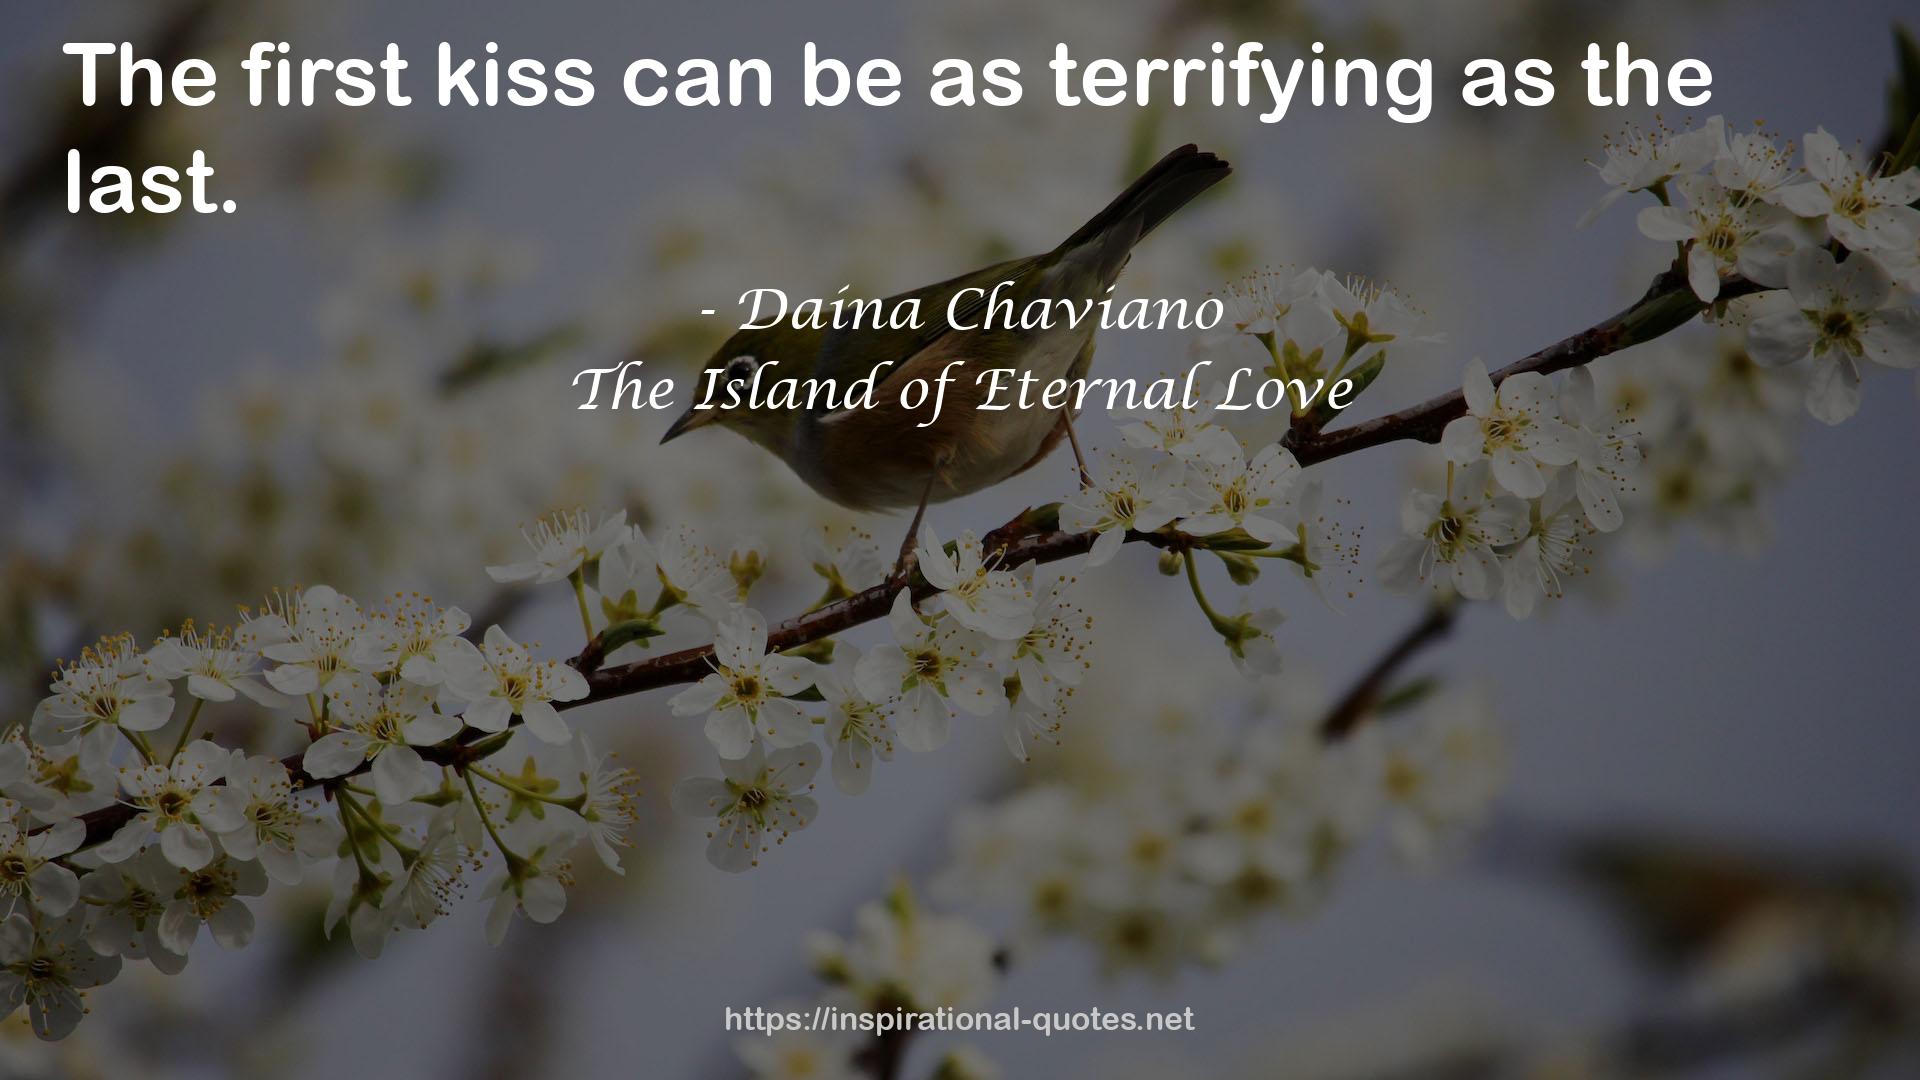 The Island of Eternal Love QUOTES